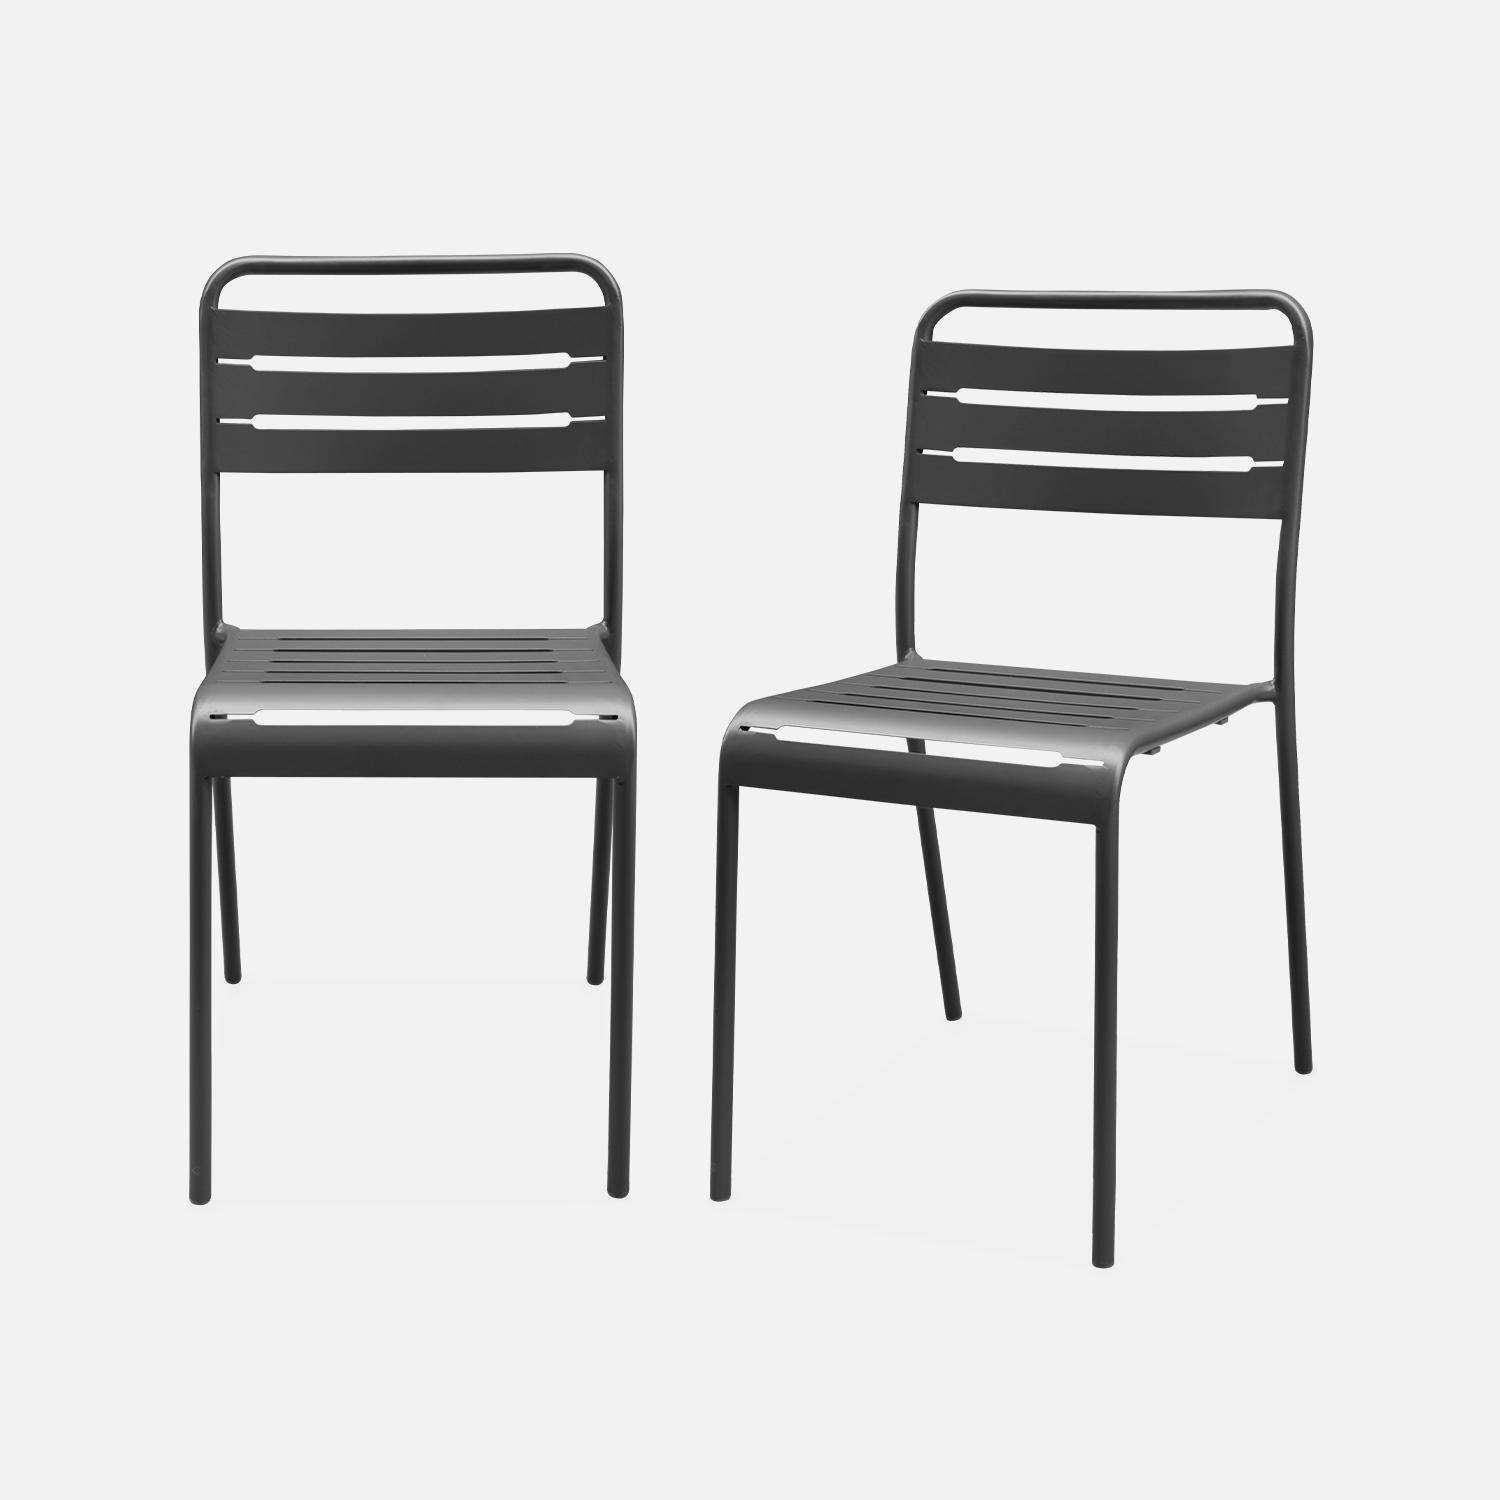 Pair of bistro steel garden chairs, stackable, W44xD52xH79cm, Anthracite,sweeek,Photo4